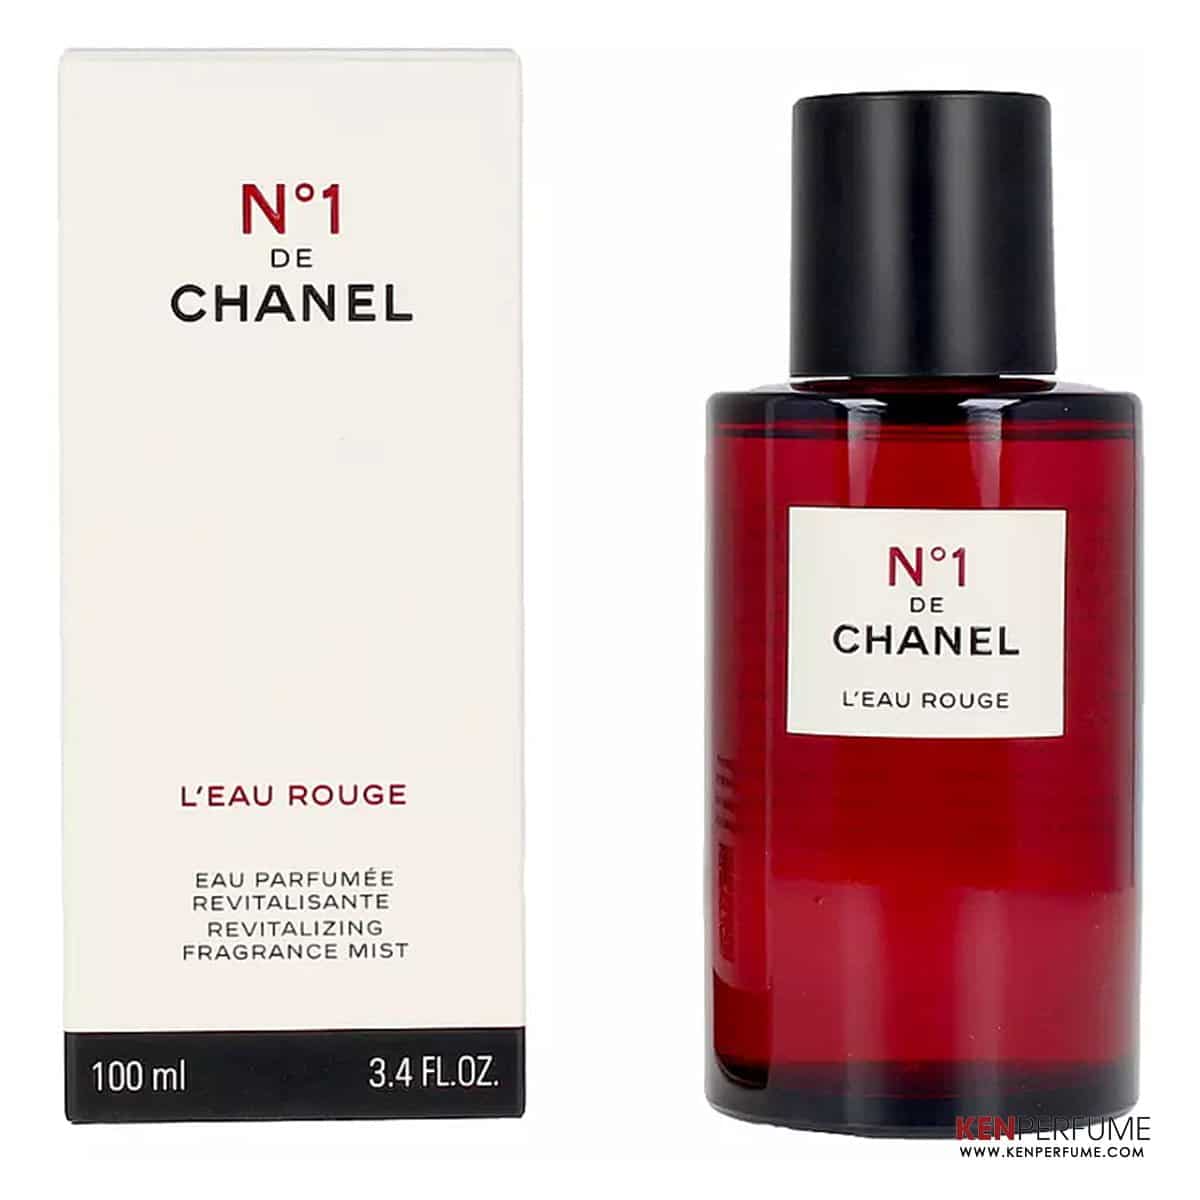 Chanel New No1 Beauty Collection Skincare Makeup And Fragrance  Glamour  UK